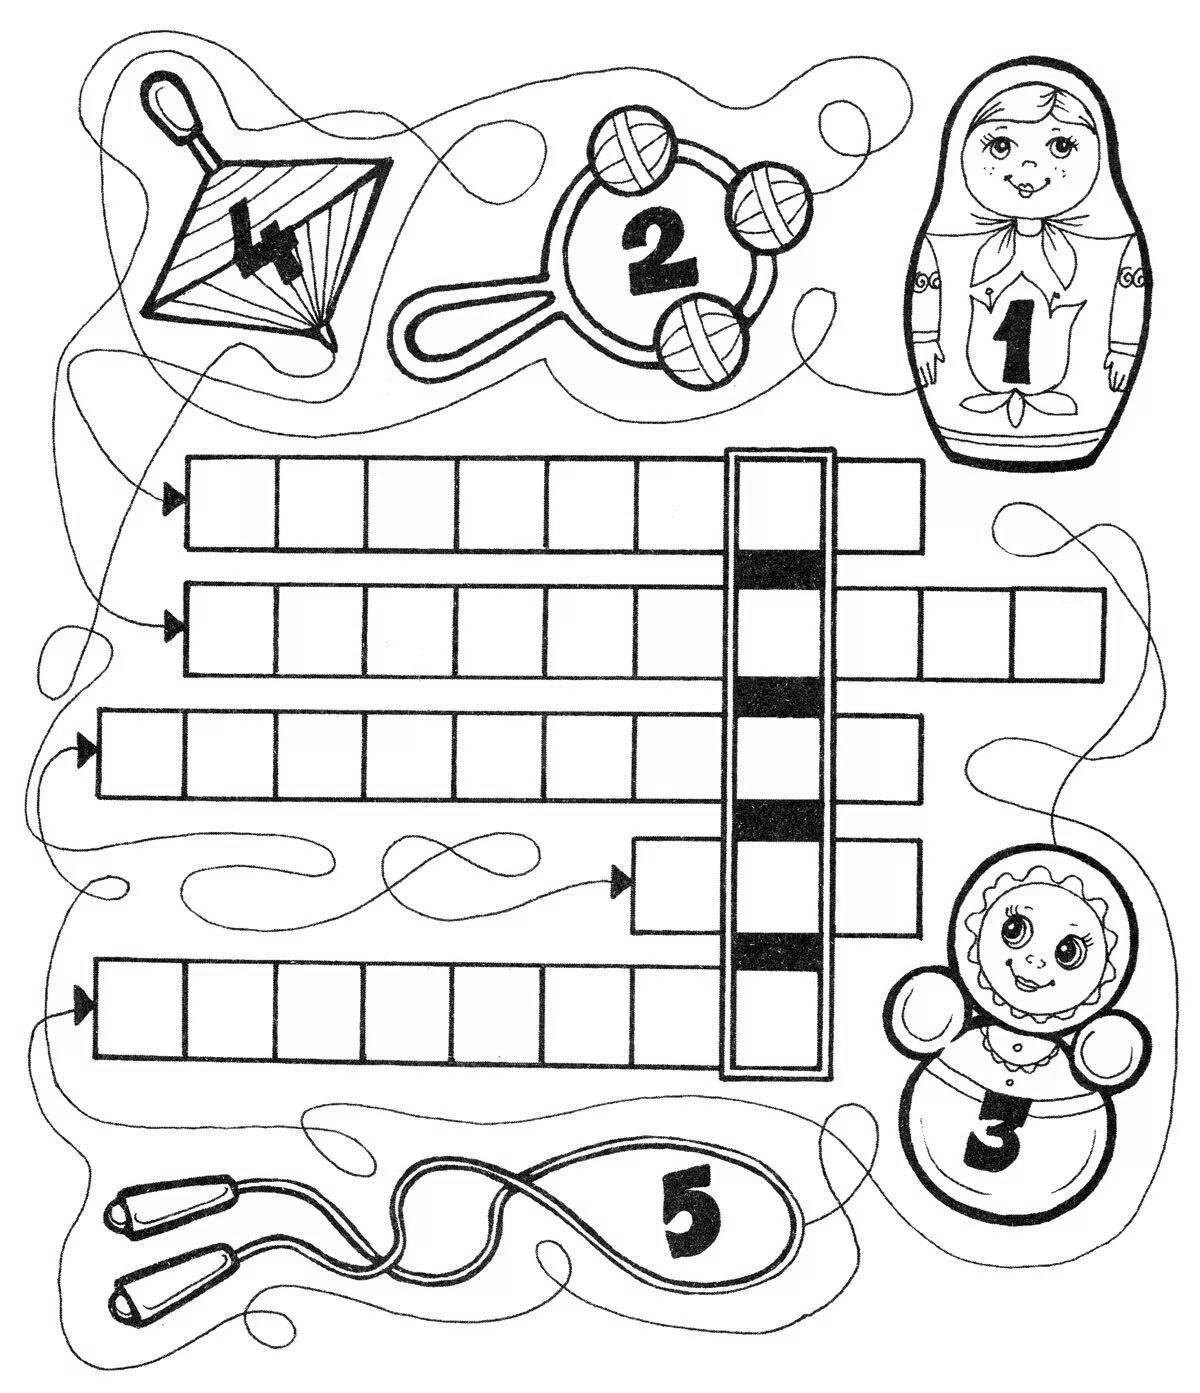 Educational coloring games for children 7 years old